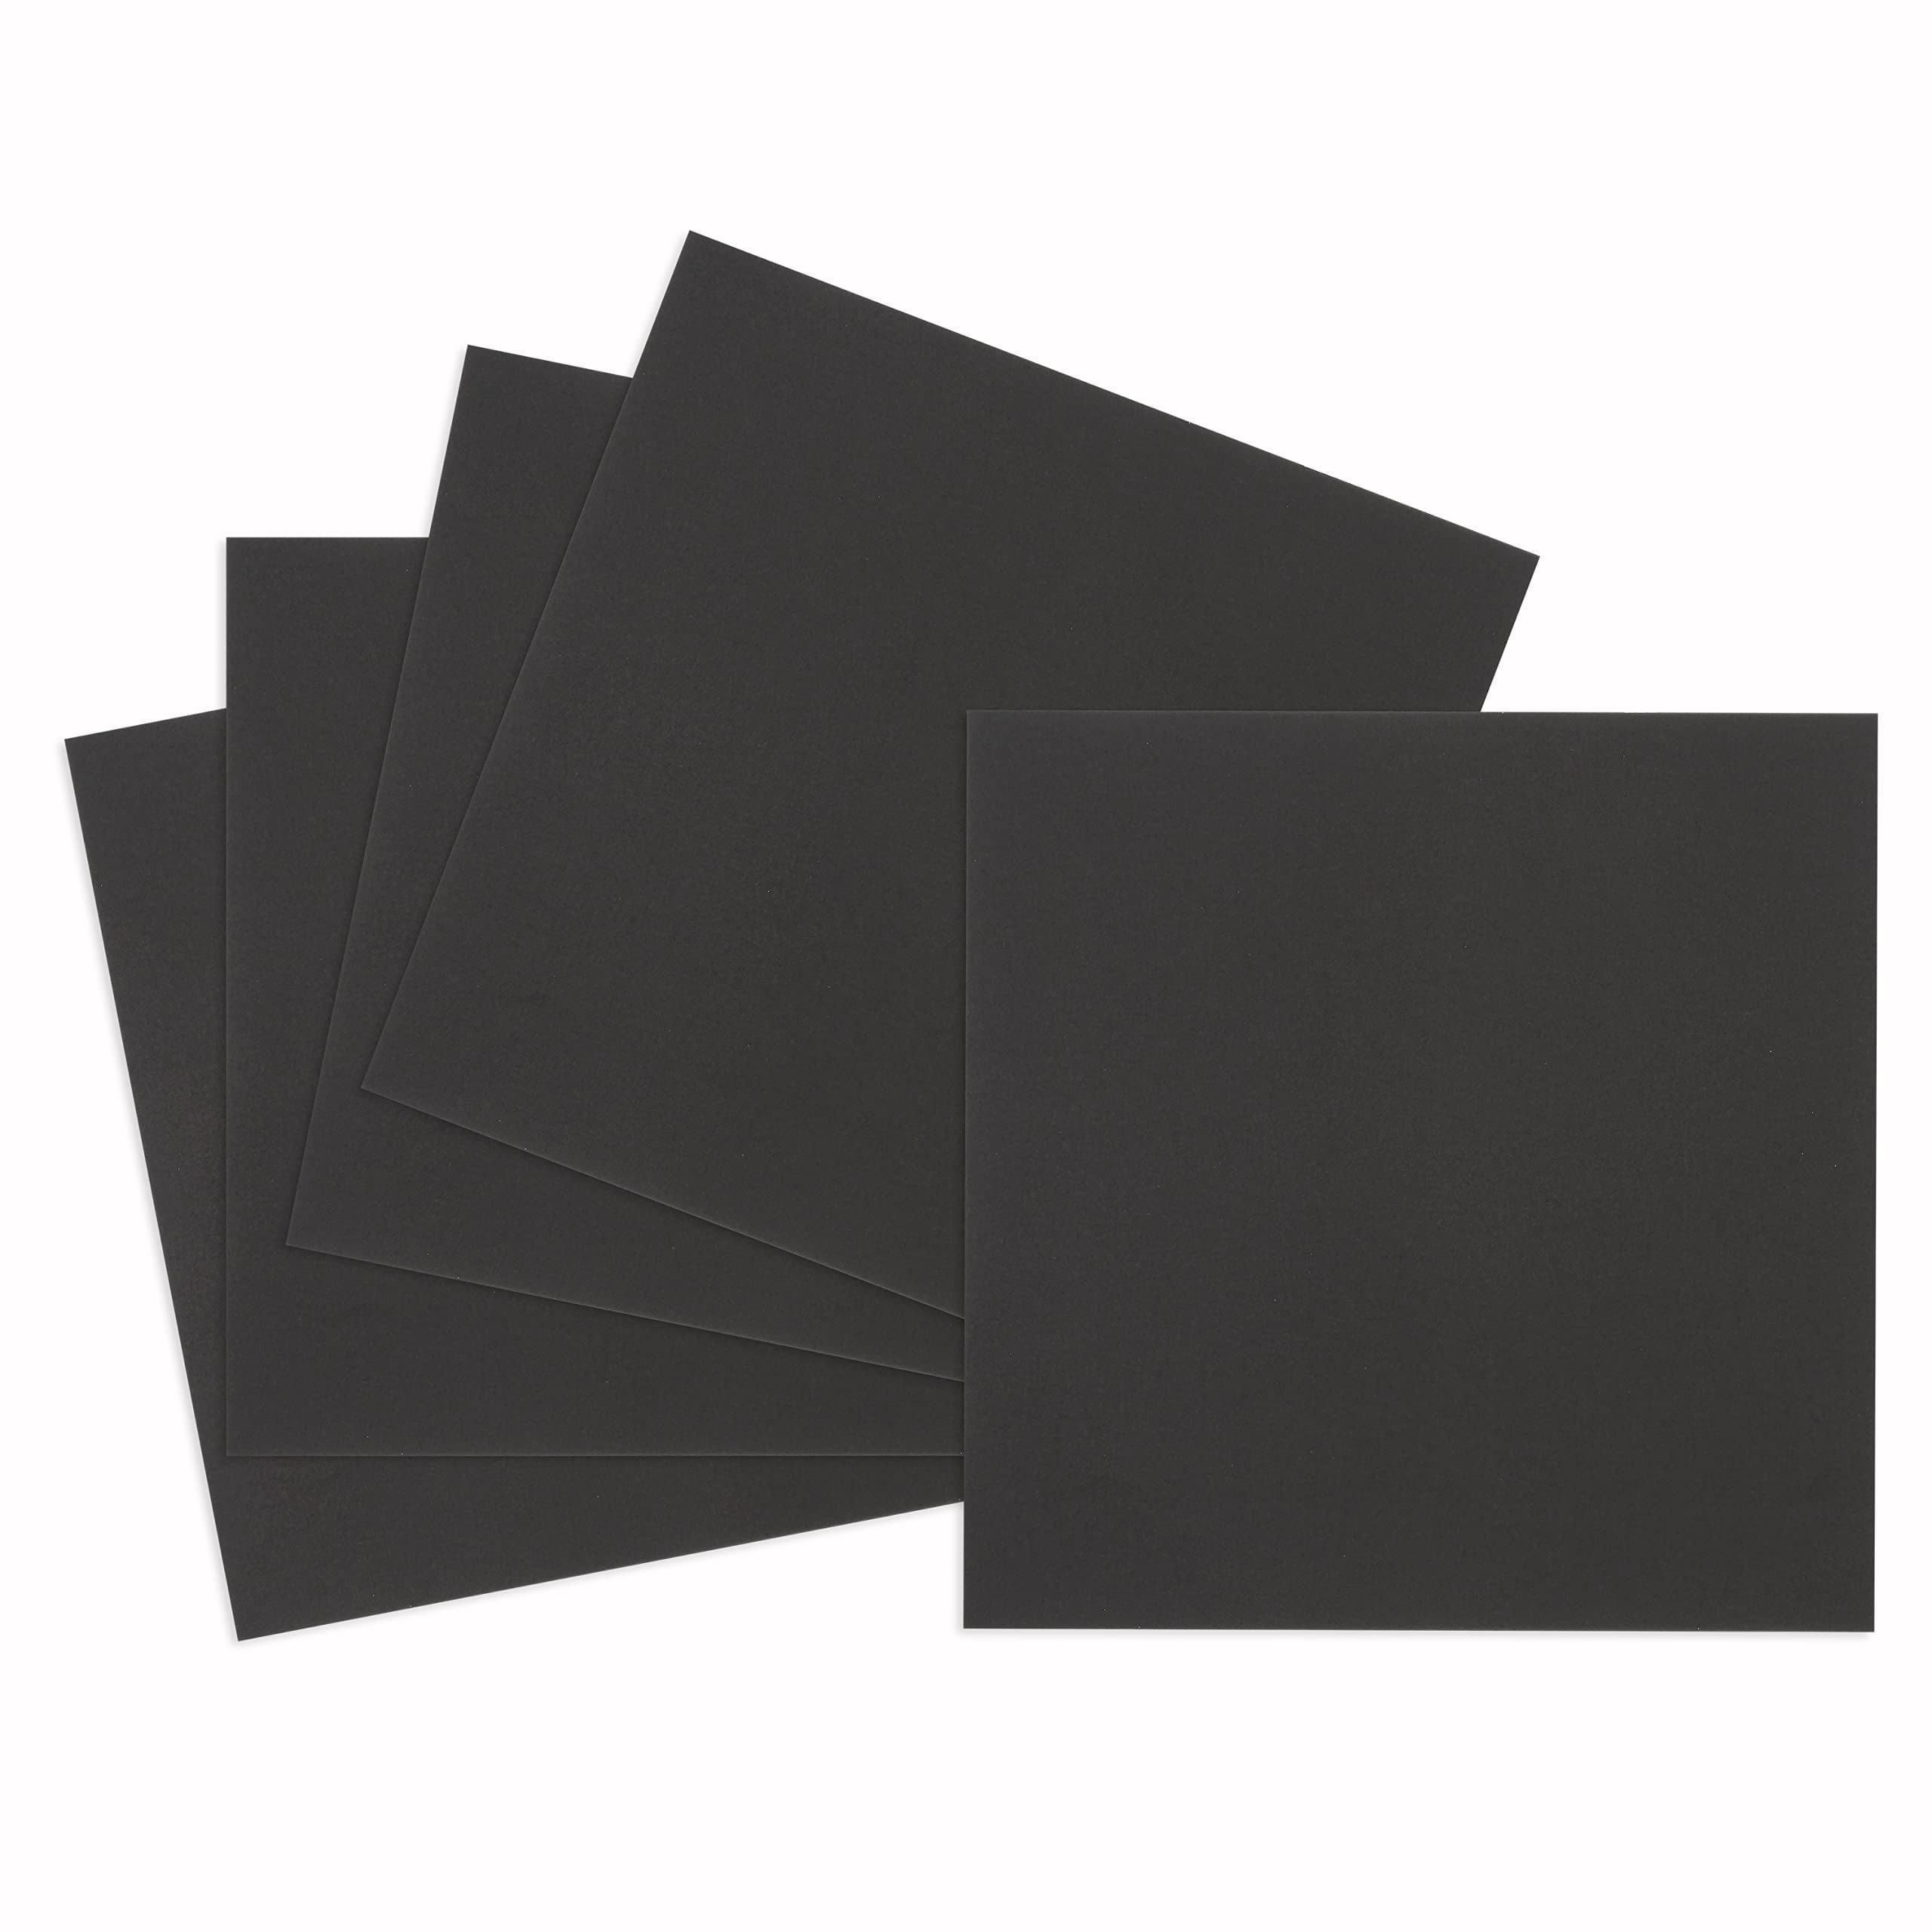 40 Sheet 12 x 12 White Smooth Cardstock Paper Pack by Park Lane